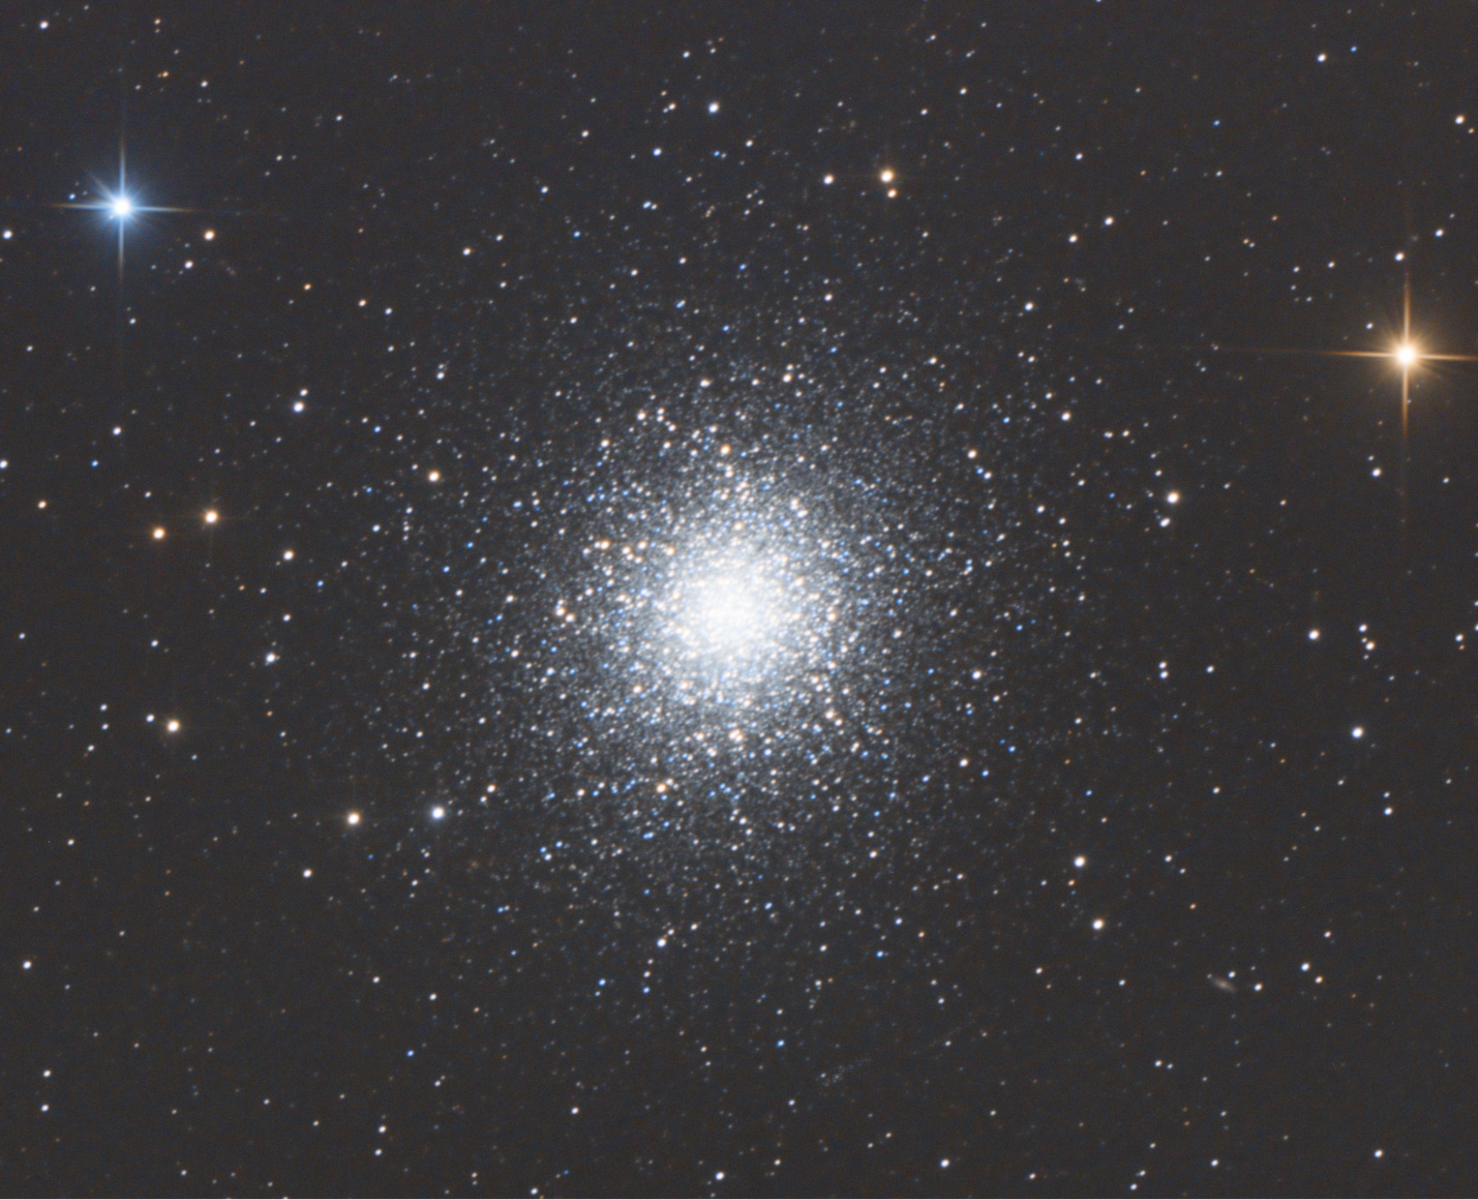 The Globular Cluster Messier 13 in the constellation of Hercules